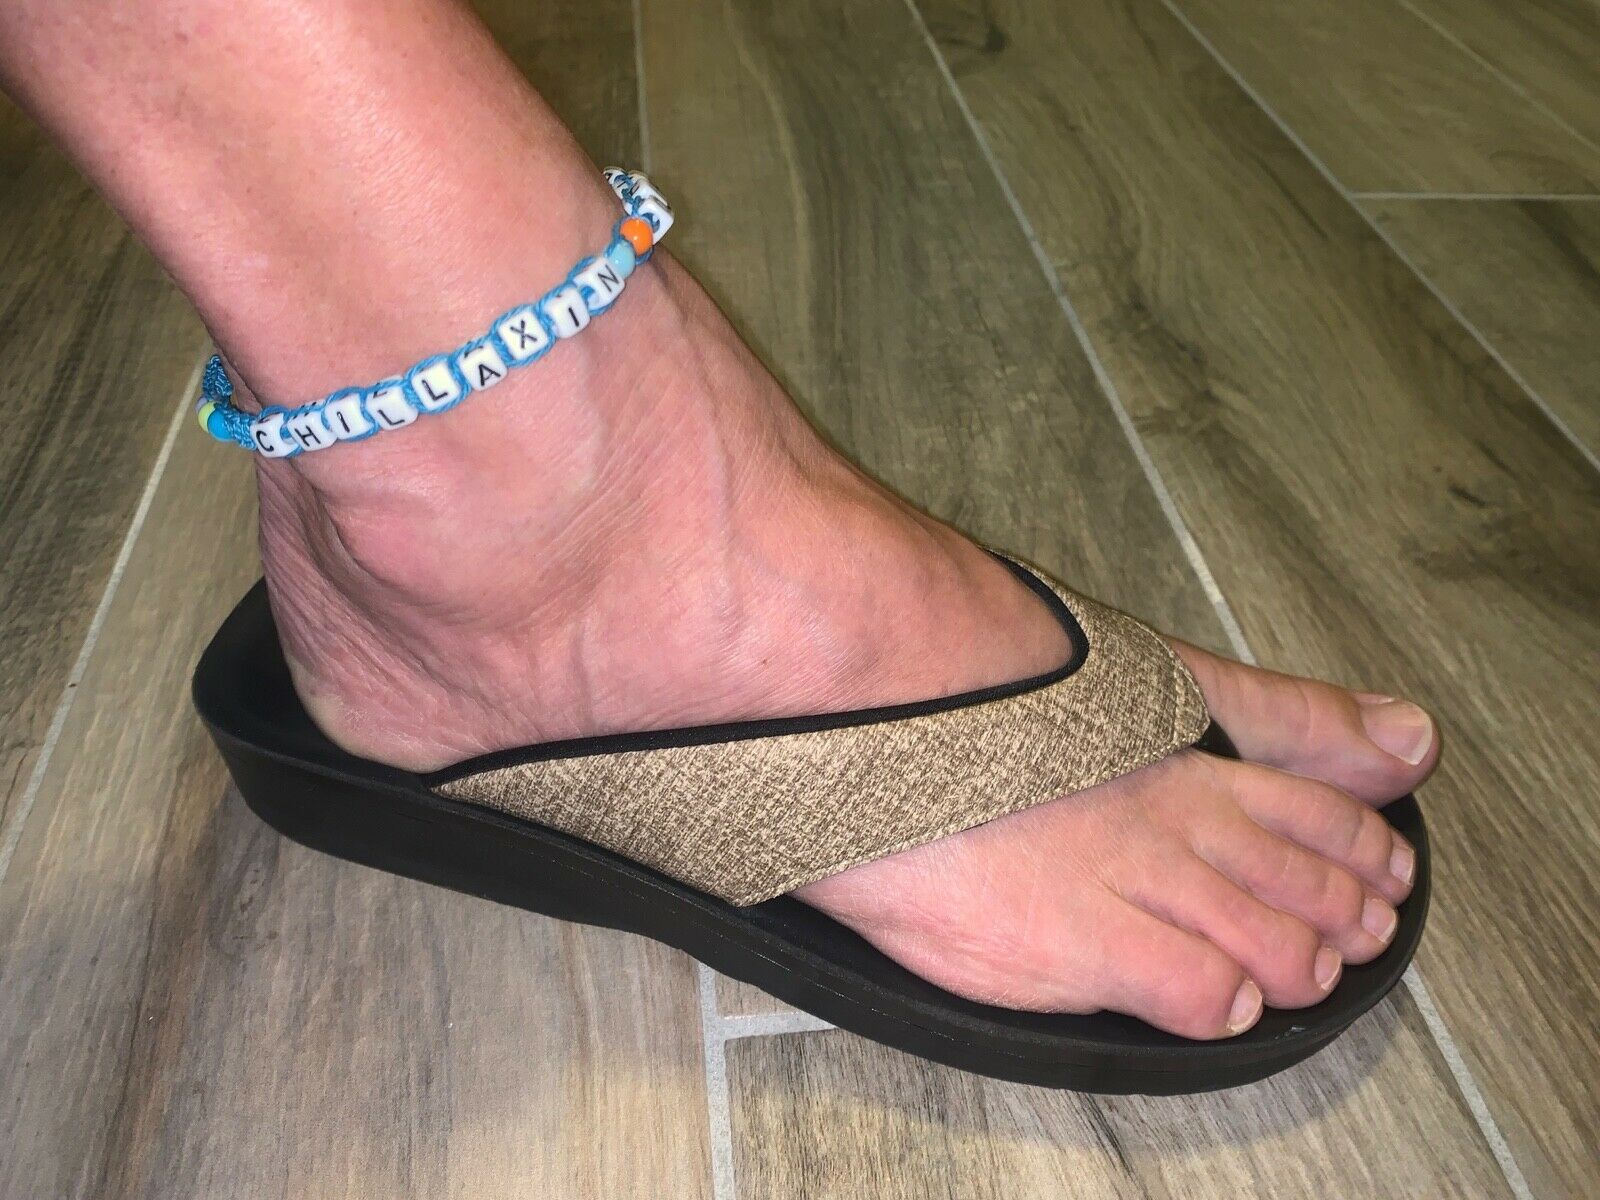 Handmade Macrame Word Anklet Blue Cord Color Chillaxin 10"